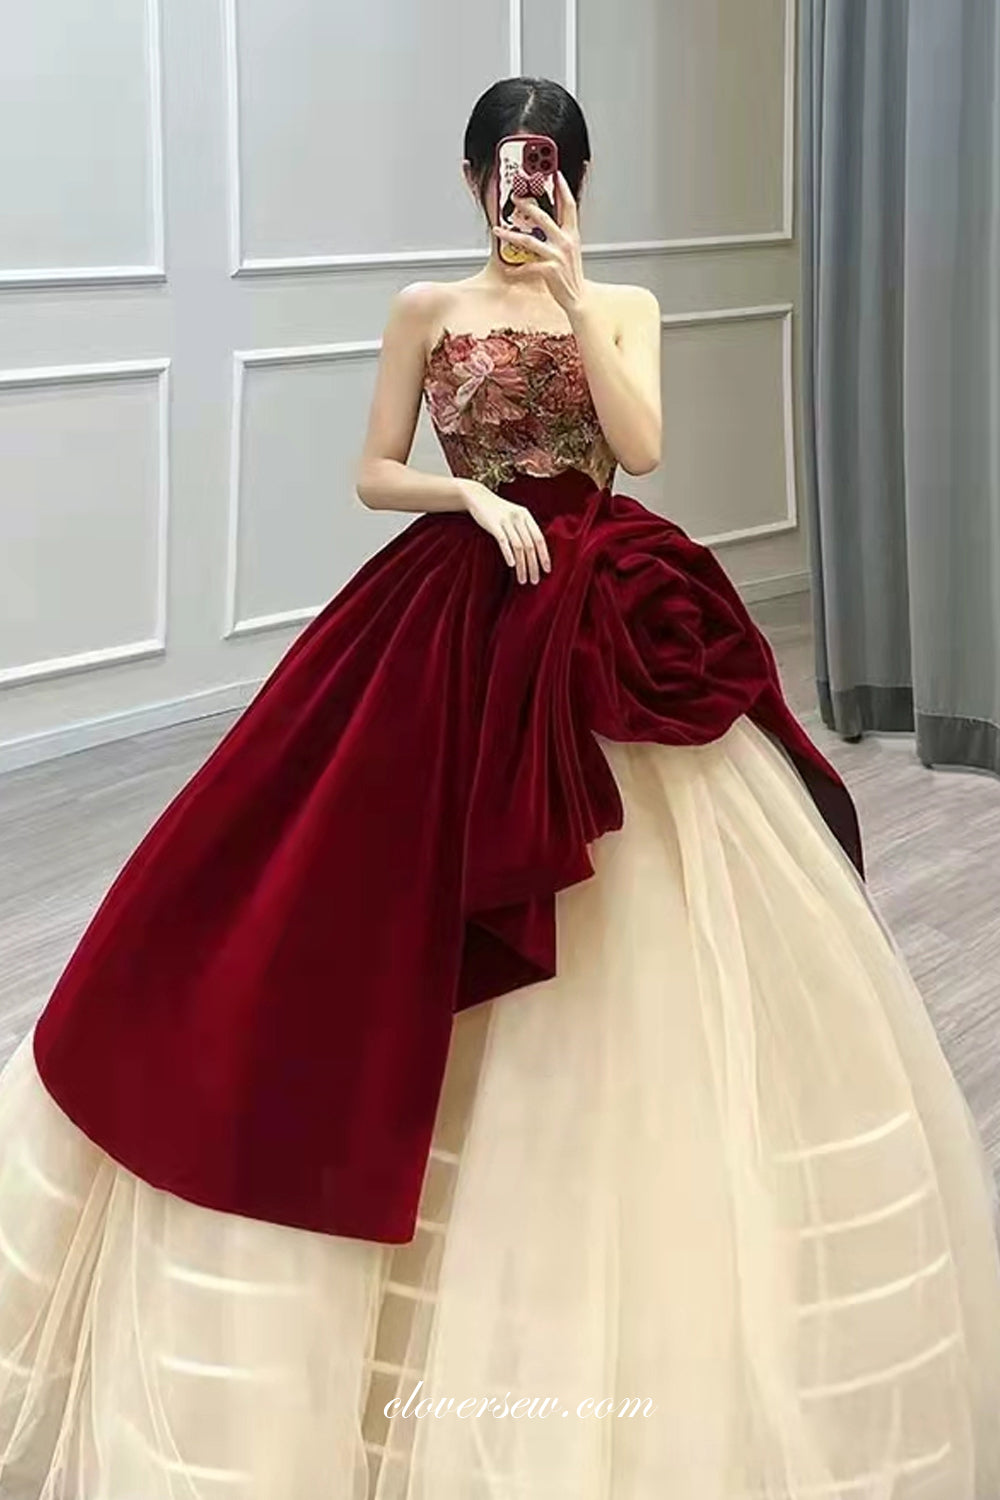 Floral Printed Satin Burgundy Ivory Ball Gown Strapless Princess Dresses, CP0793